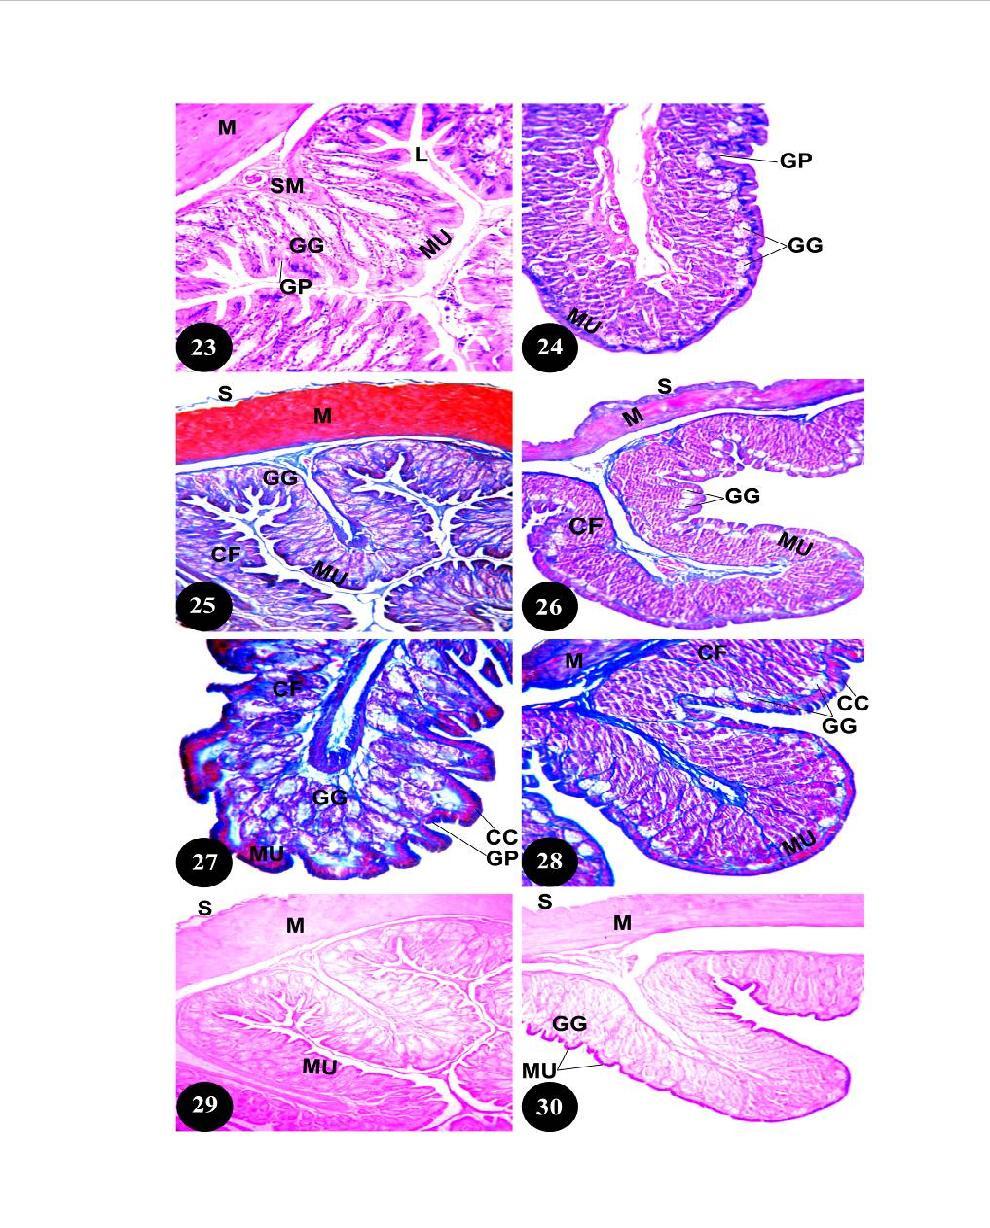 Fig. 23: T.S. of the stomach of Scincus scincus showing the mucosa (MU), the gastric pits (GP) and the gastric glands (GG). H.E., X 200. Fig. 24: T.S. of the stomach of Natrix tessellata displaying the mucosa (MU), the gastric pits (GP) and the gastric glands (GG).